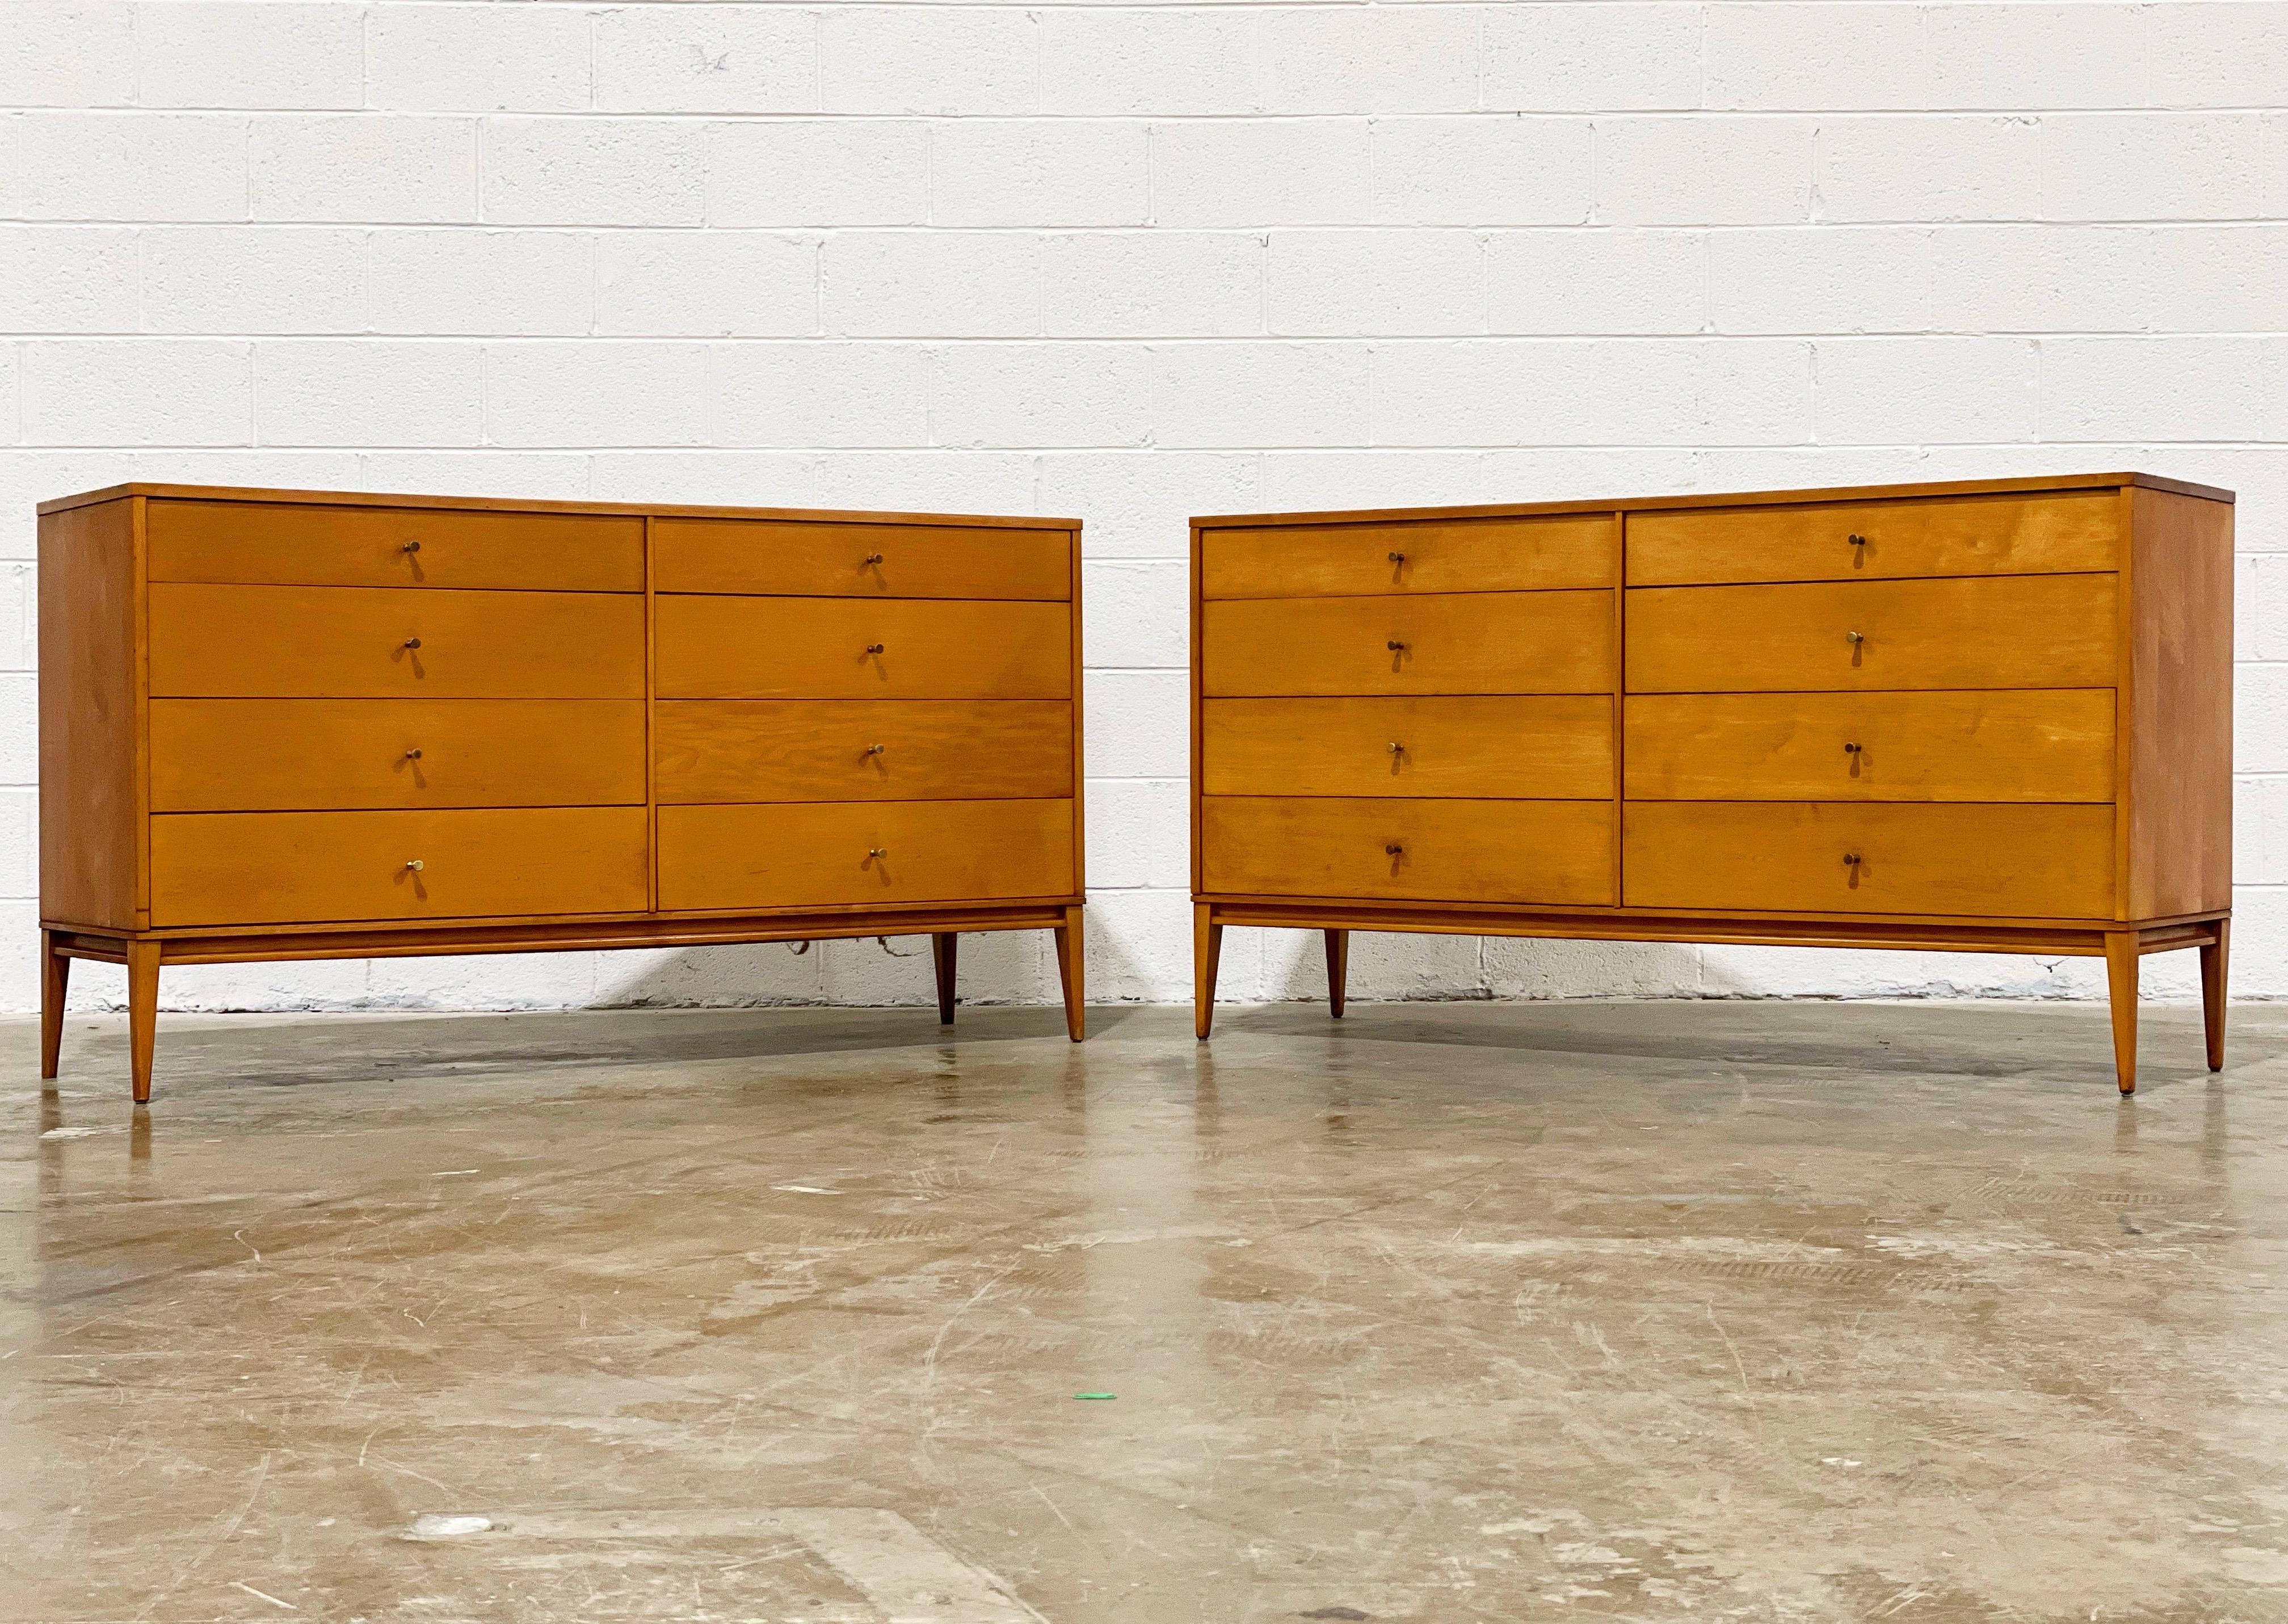 Pair of Mid-Century Modern Paul McCobb 8-drawer dressers - Planner Group model #1507 by Winchedon. Scarce matching pair of stellar case pieces - eight drawers, solid maple, original brass cone pulls. Solid maple original base. Original foil label.